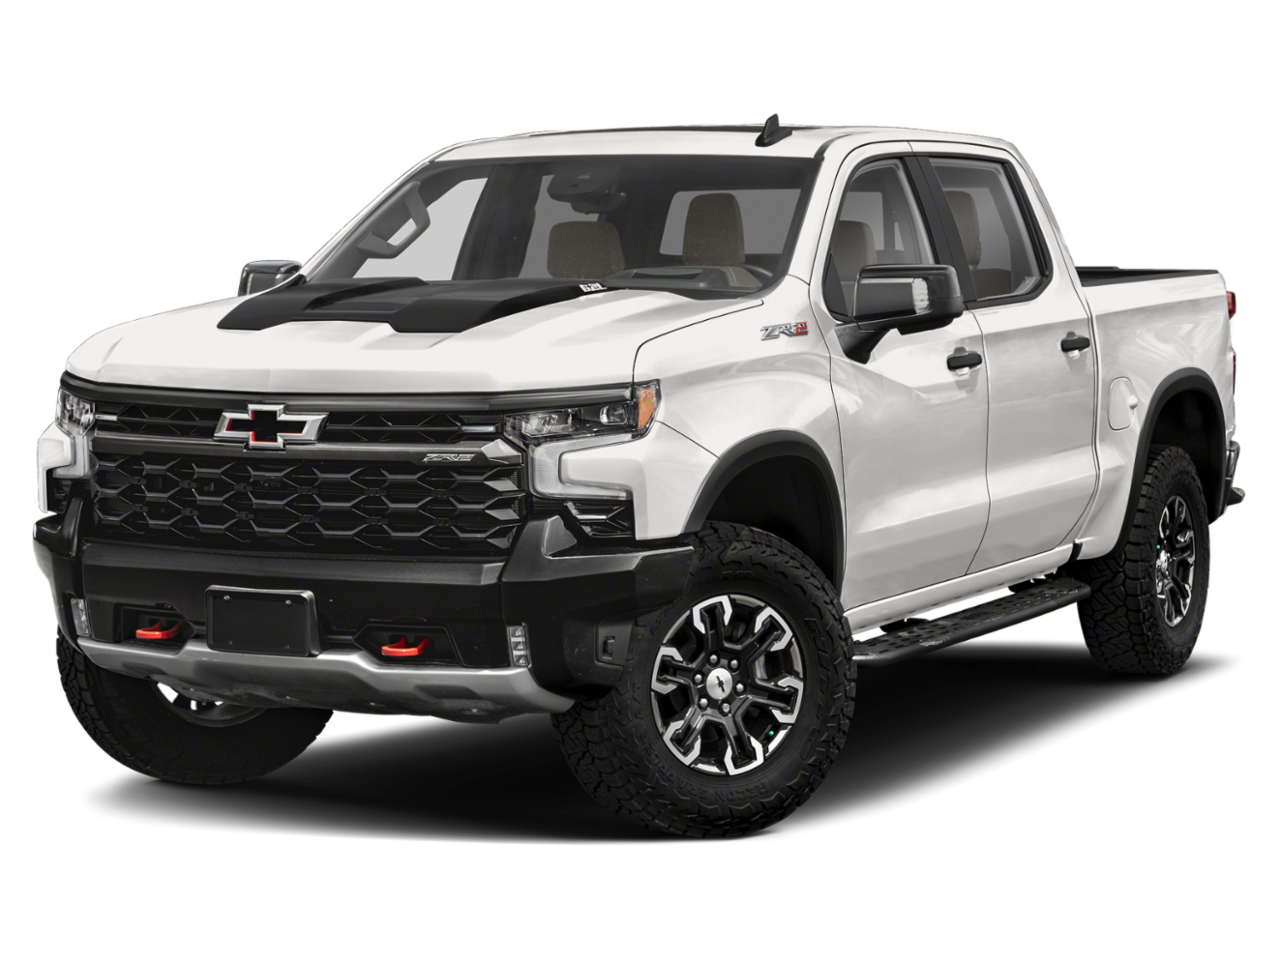 chevy truck png